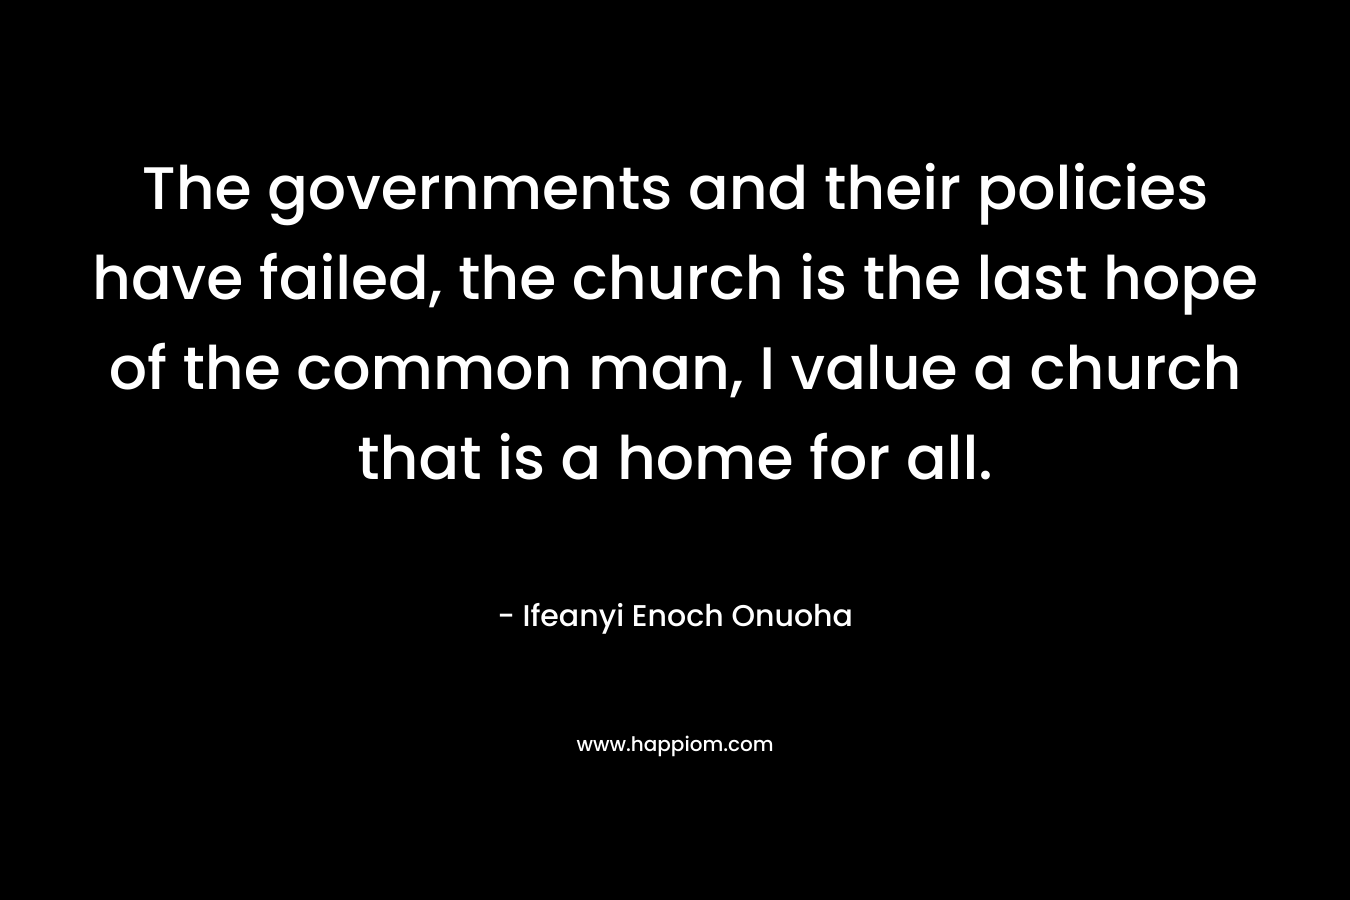 The governments and their policies have failed, the church is the last hope of the common man, I value a church that is a home for all.